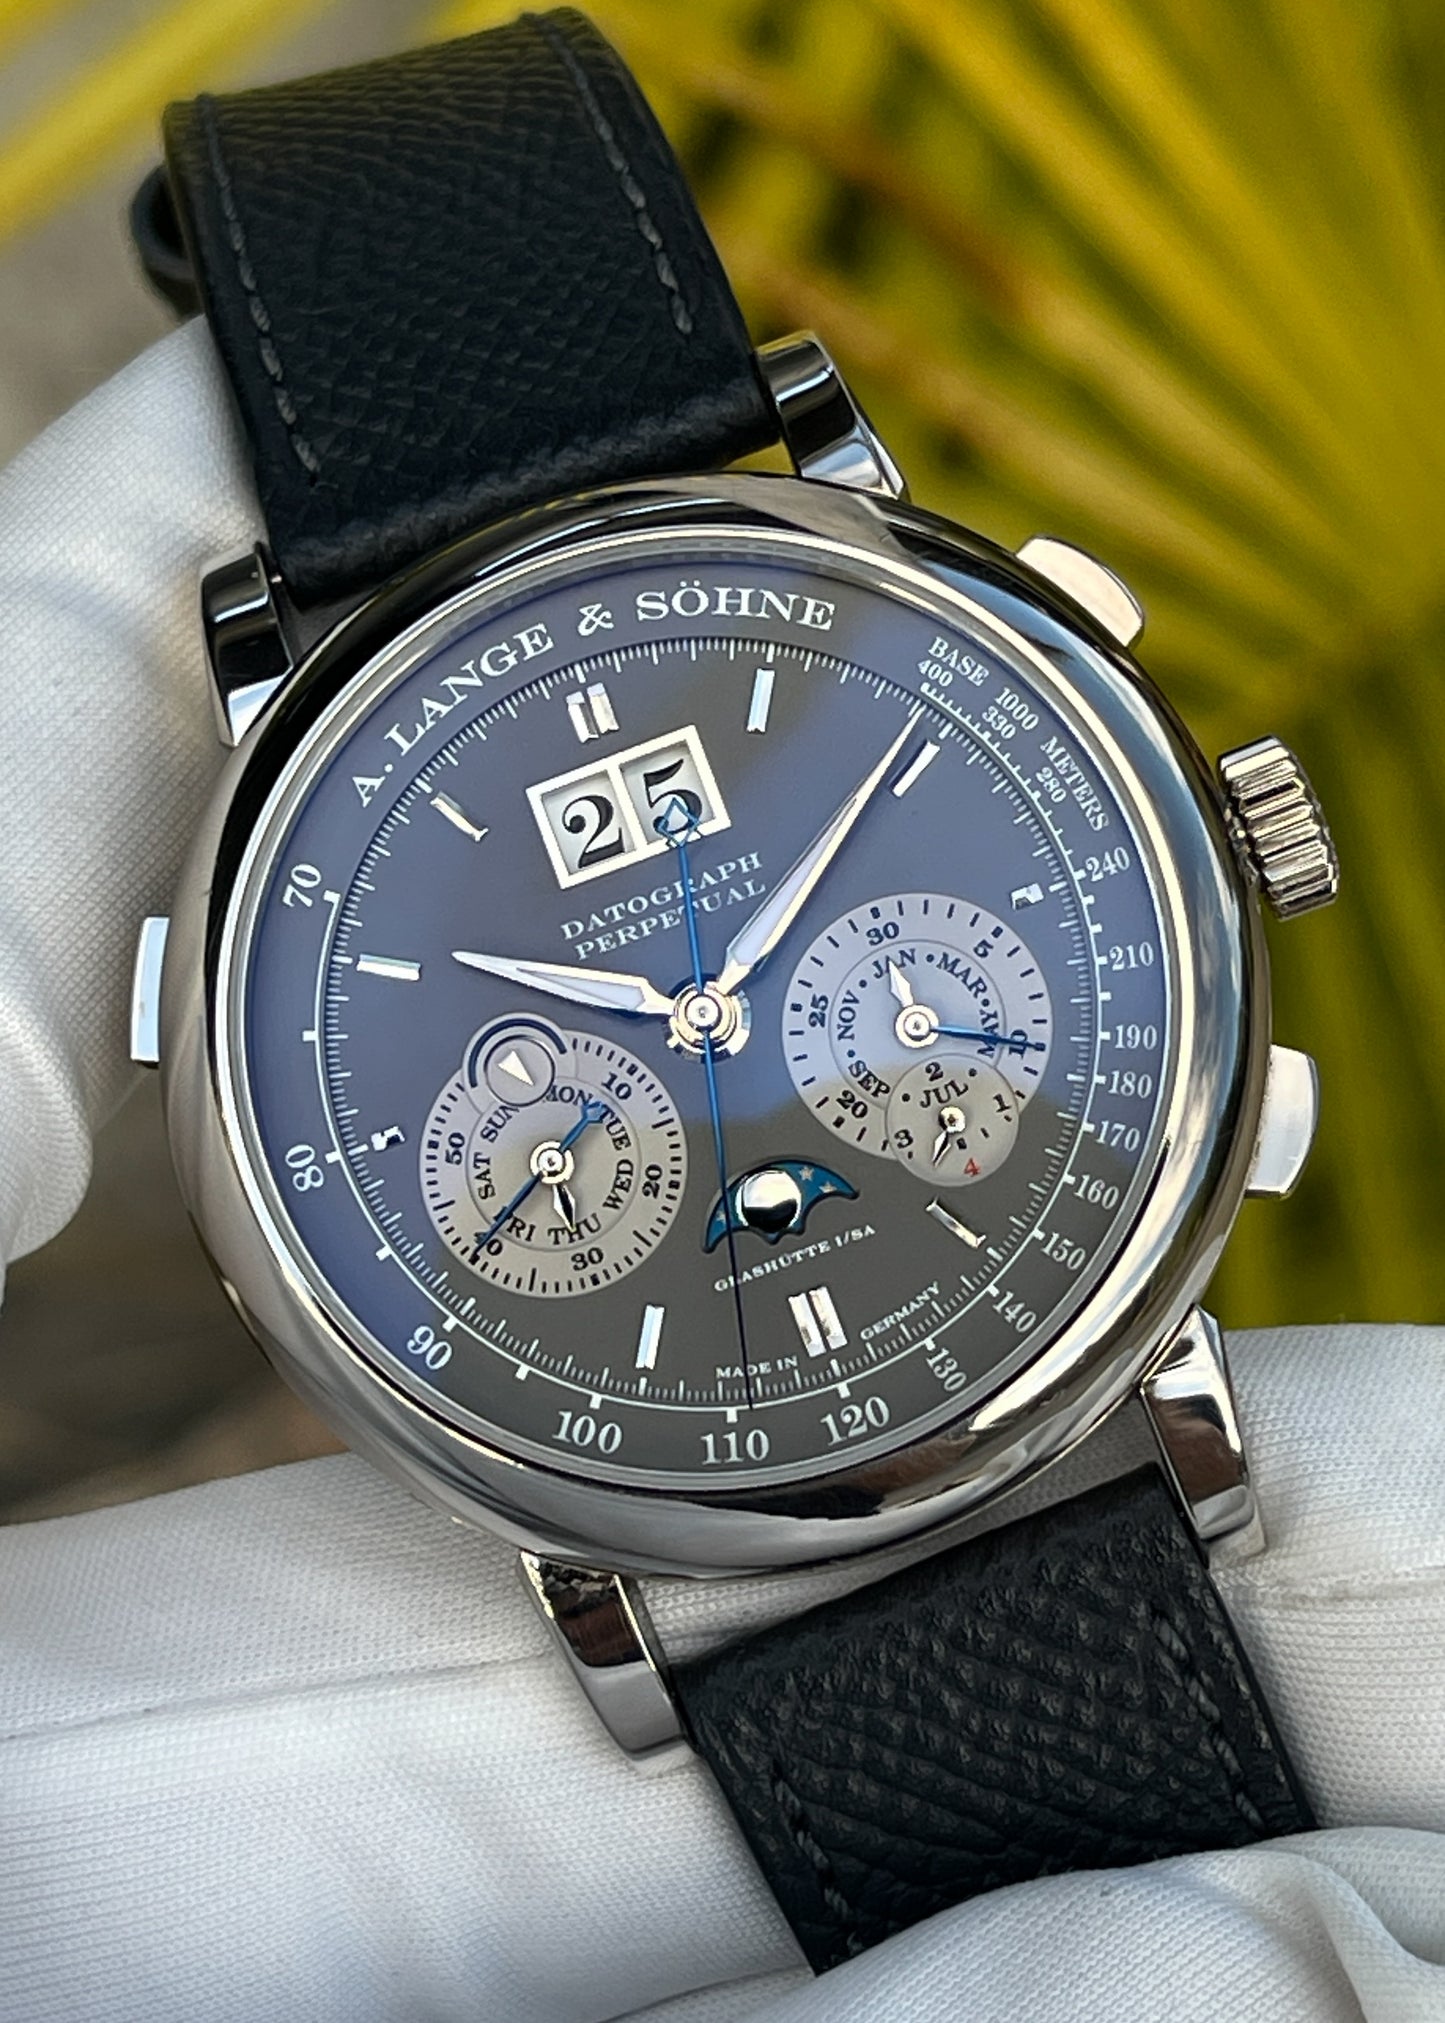 A. Lange & Sohne Datograph Perpetual - Serial #247819 (Pre-Owned)